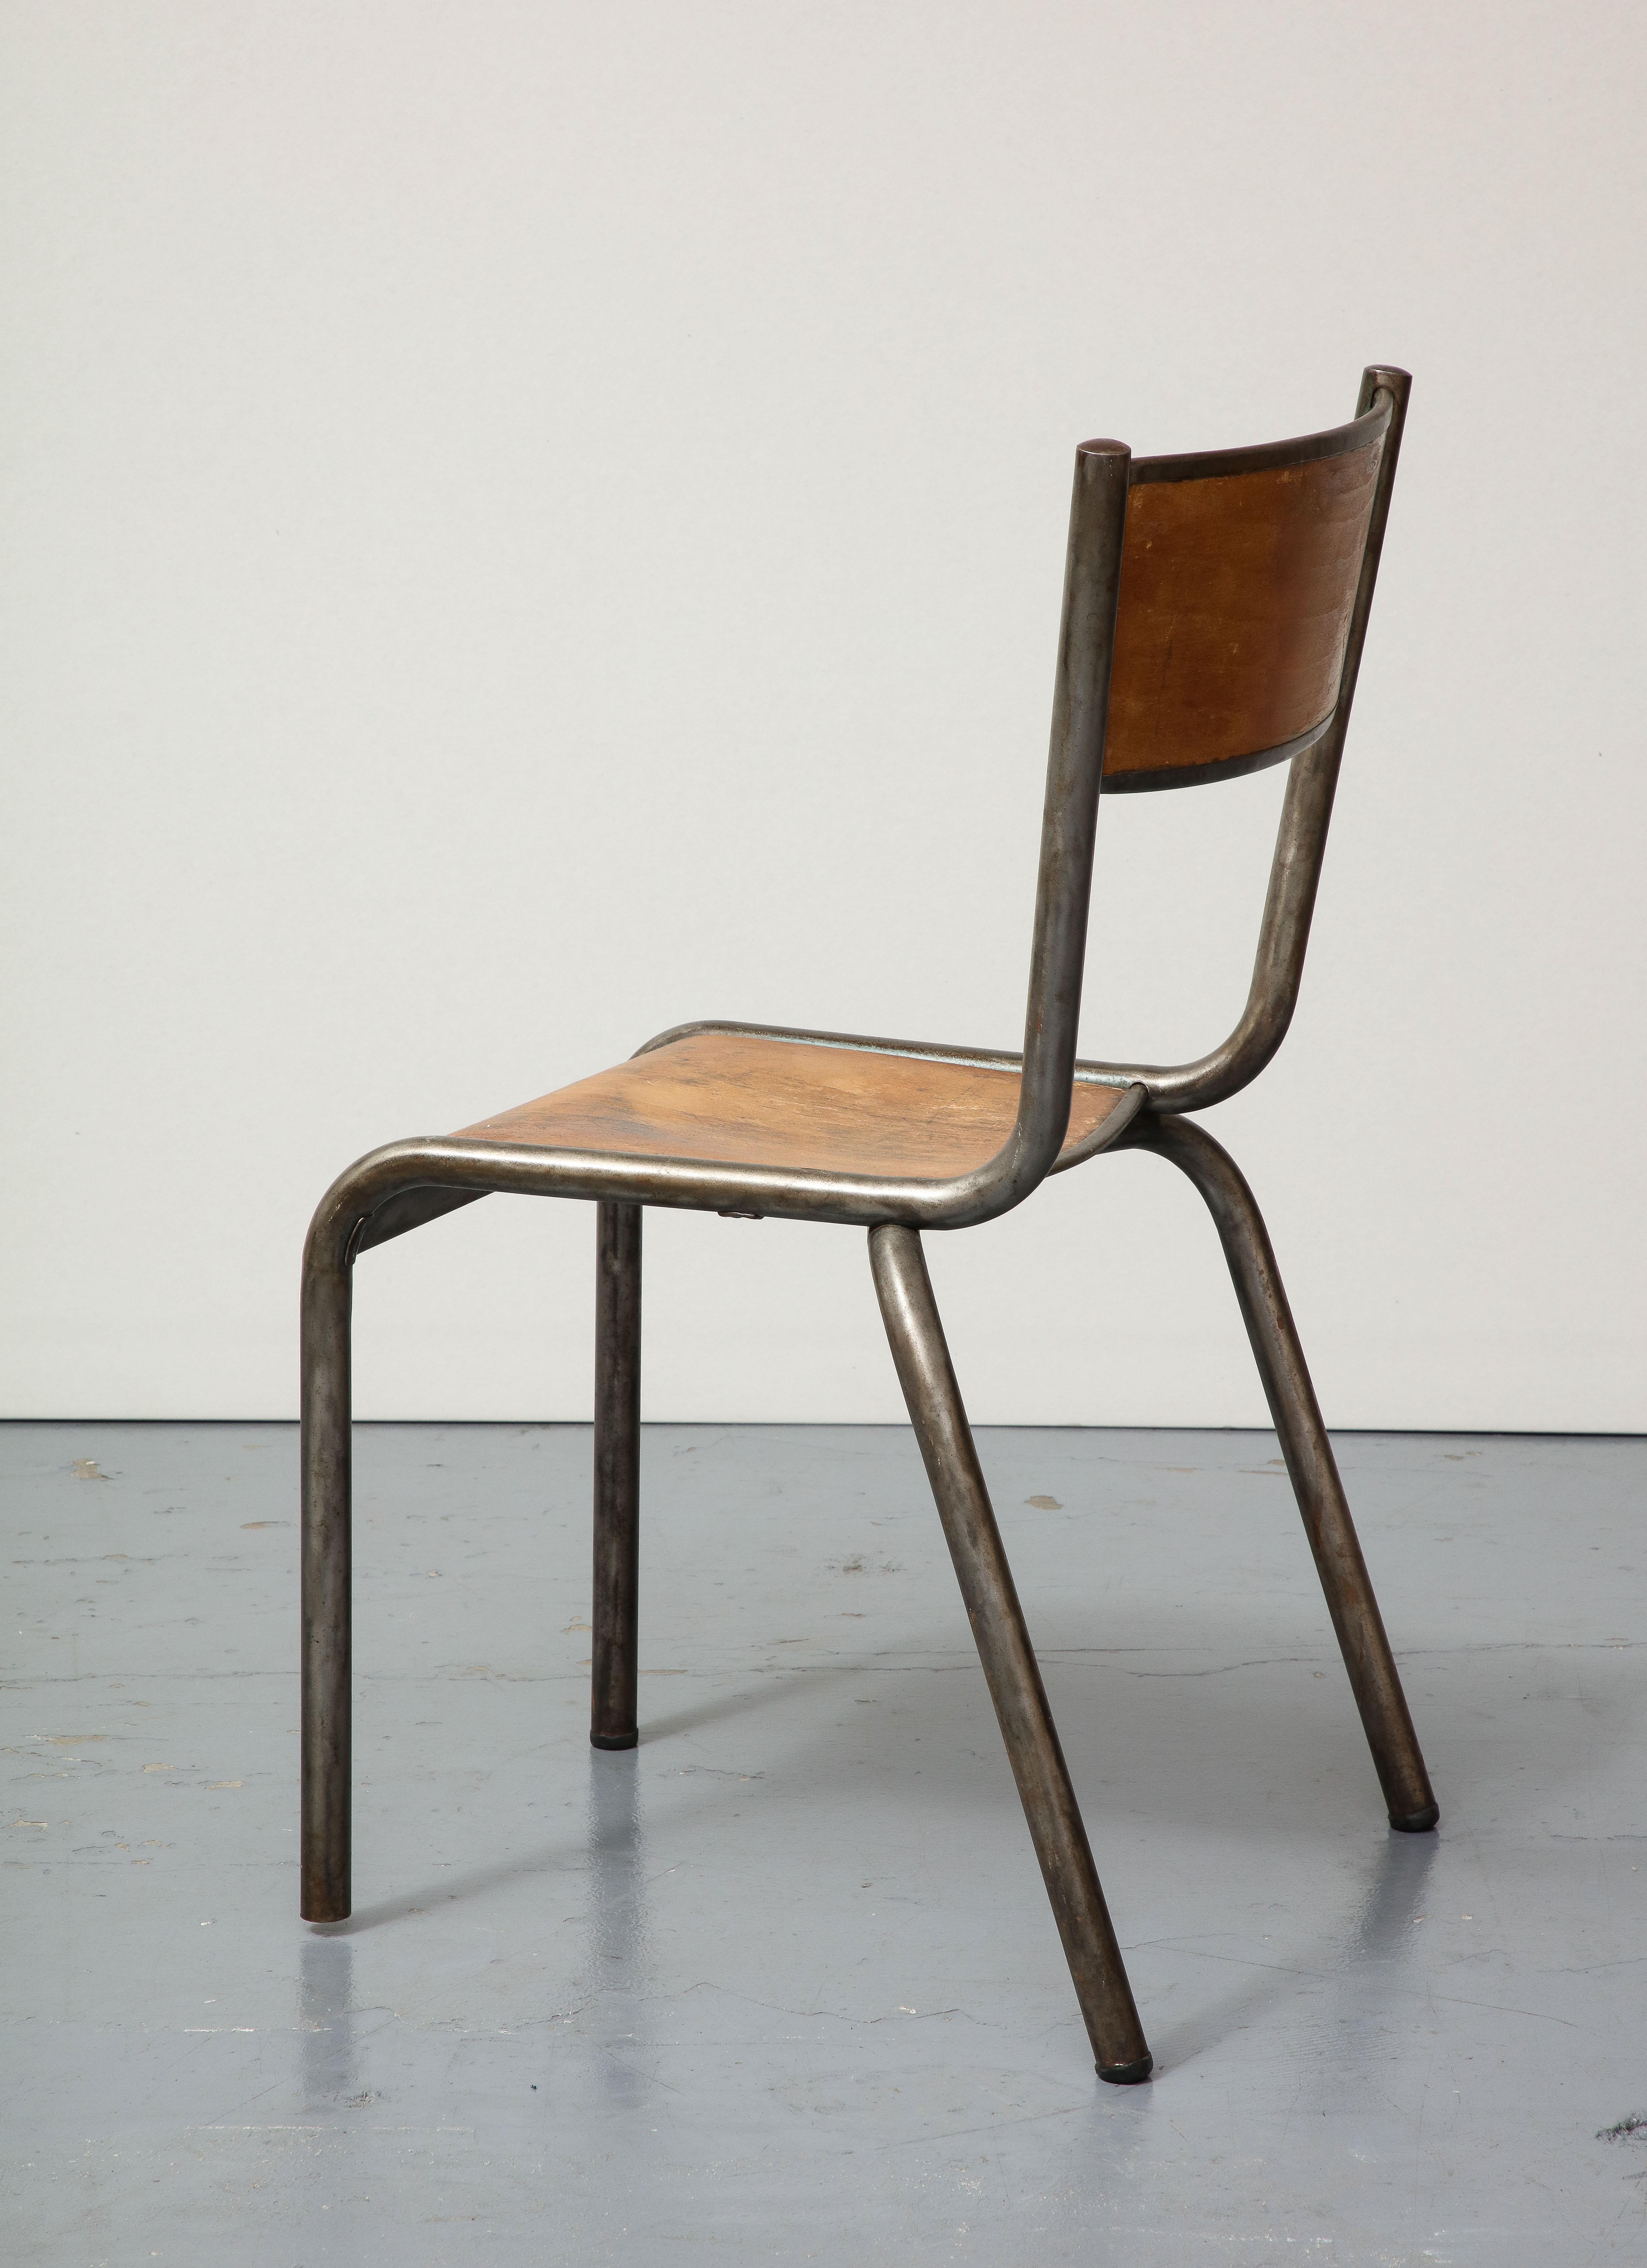 Polished Steel and Bentwood Chair, France, c. 1940 For Sale 4